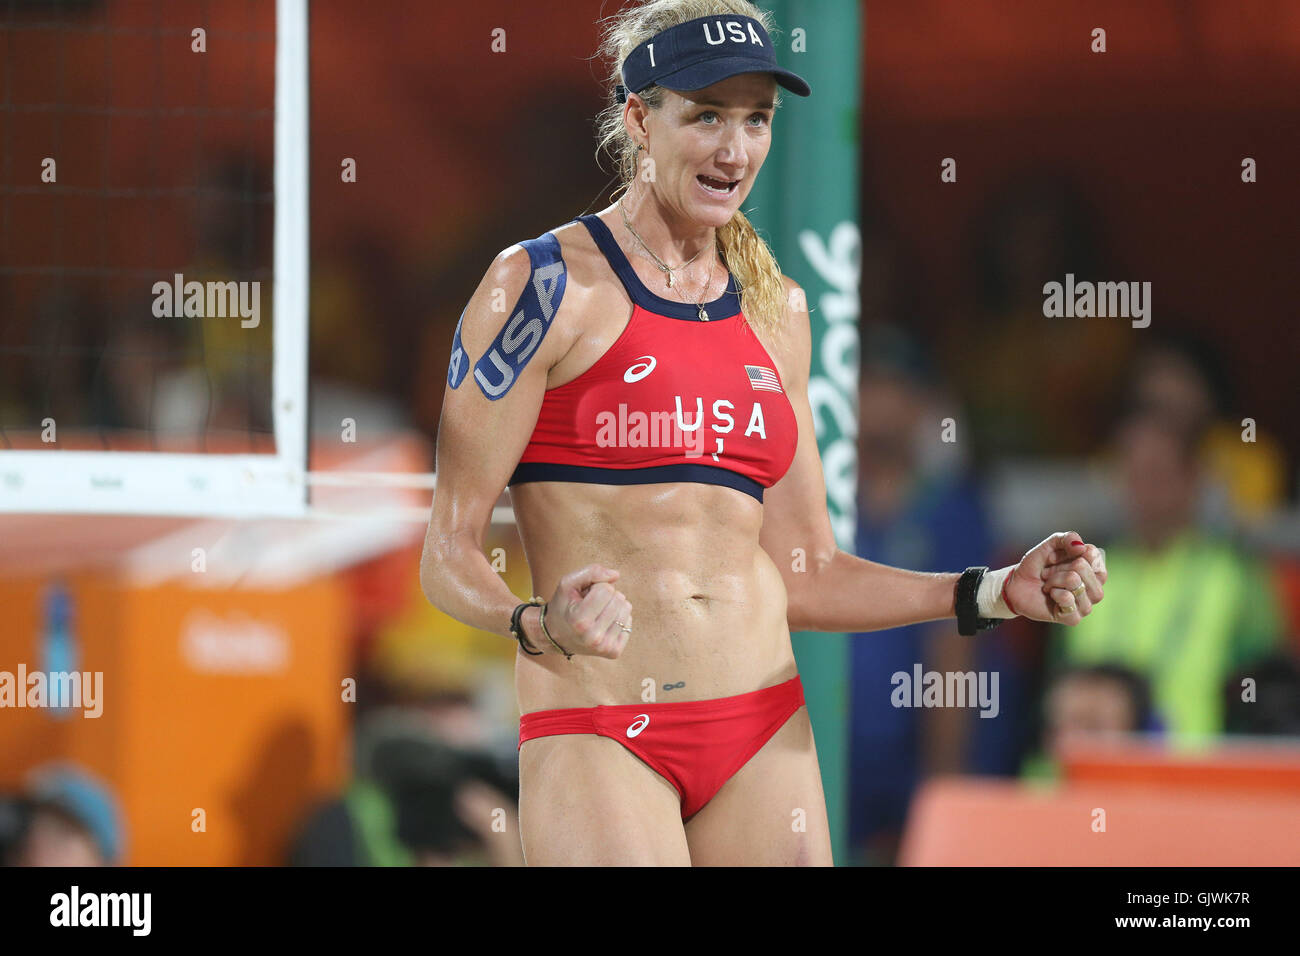 Rio De Janeiro, Rio de Janeiro, Brazil. 17th Aug, 2016. RJ - OLYMPICS/BEACH VOLLEY - SPORTS - dispute the match between Brazil's Larissa França and Talita Antunes against American Kerri Walsh-Jennings and April Ross in a match valid for the decision of Volleyball Bronze medal Women Beach in Rio 2016 in Beach Volleyball Arena Copacabana in Rio de Janeiro on Wednesday Credit:  Geraldo Bubniak/ZUMA Wire/Alamy Live News Stock Photo